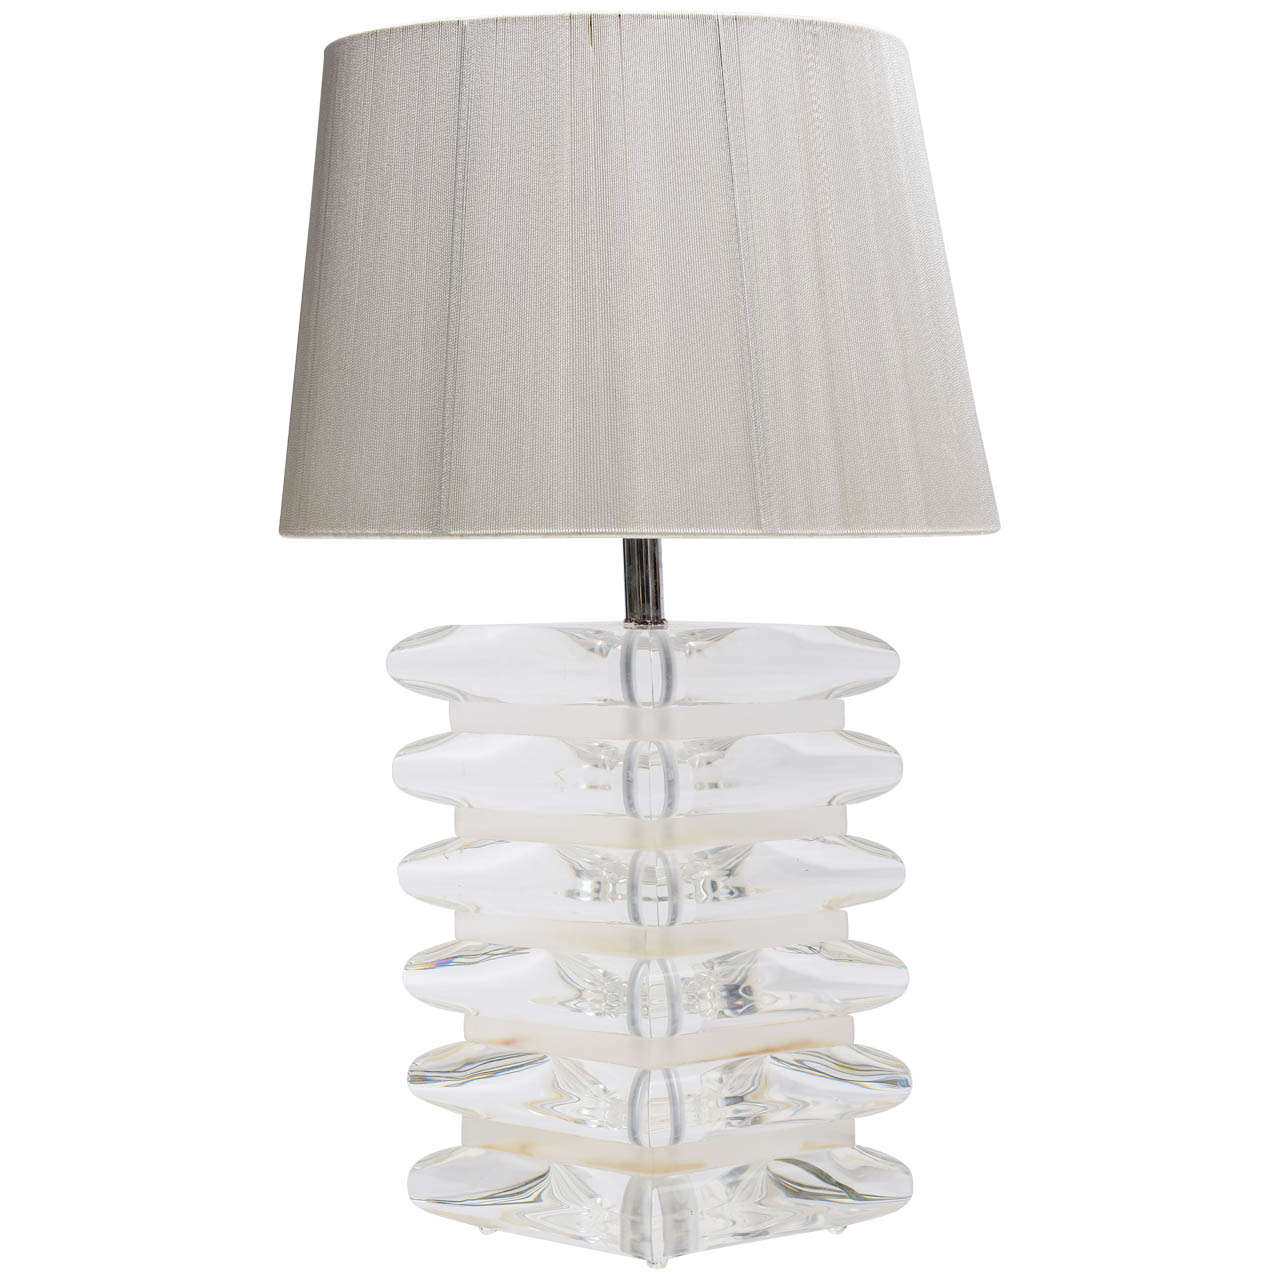 Large Vintage Stacked Lucite Lamp